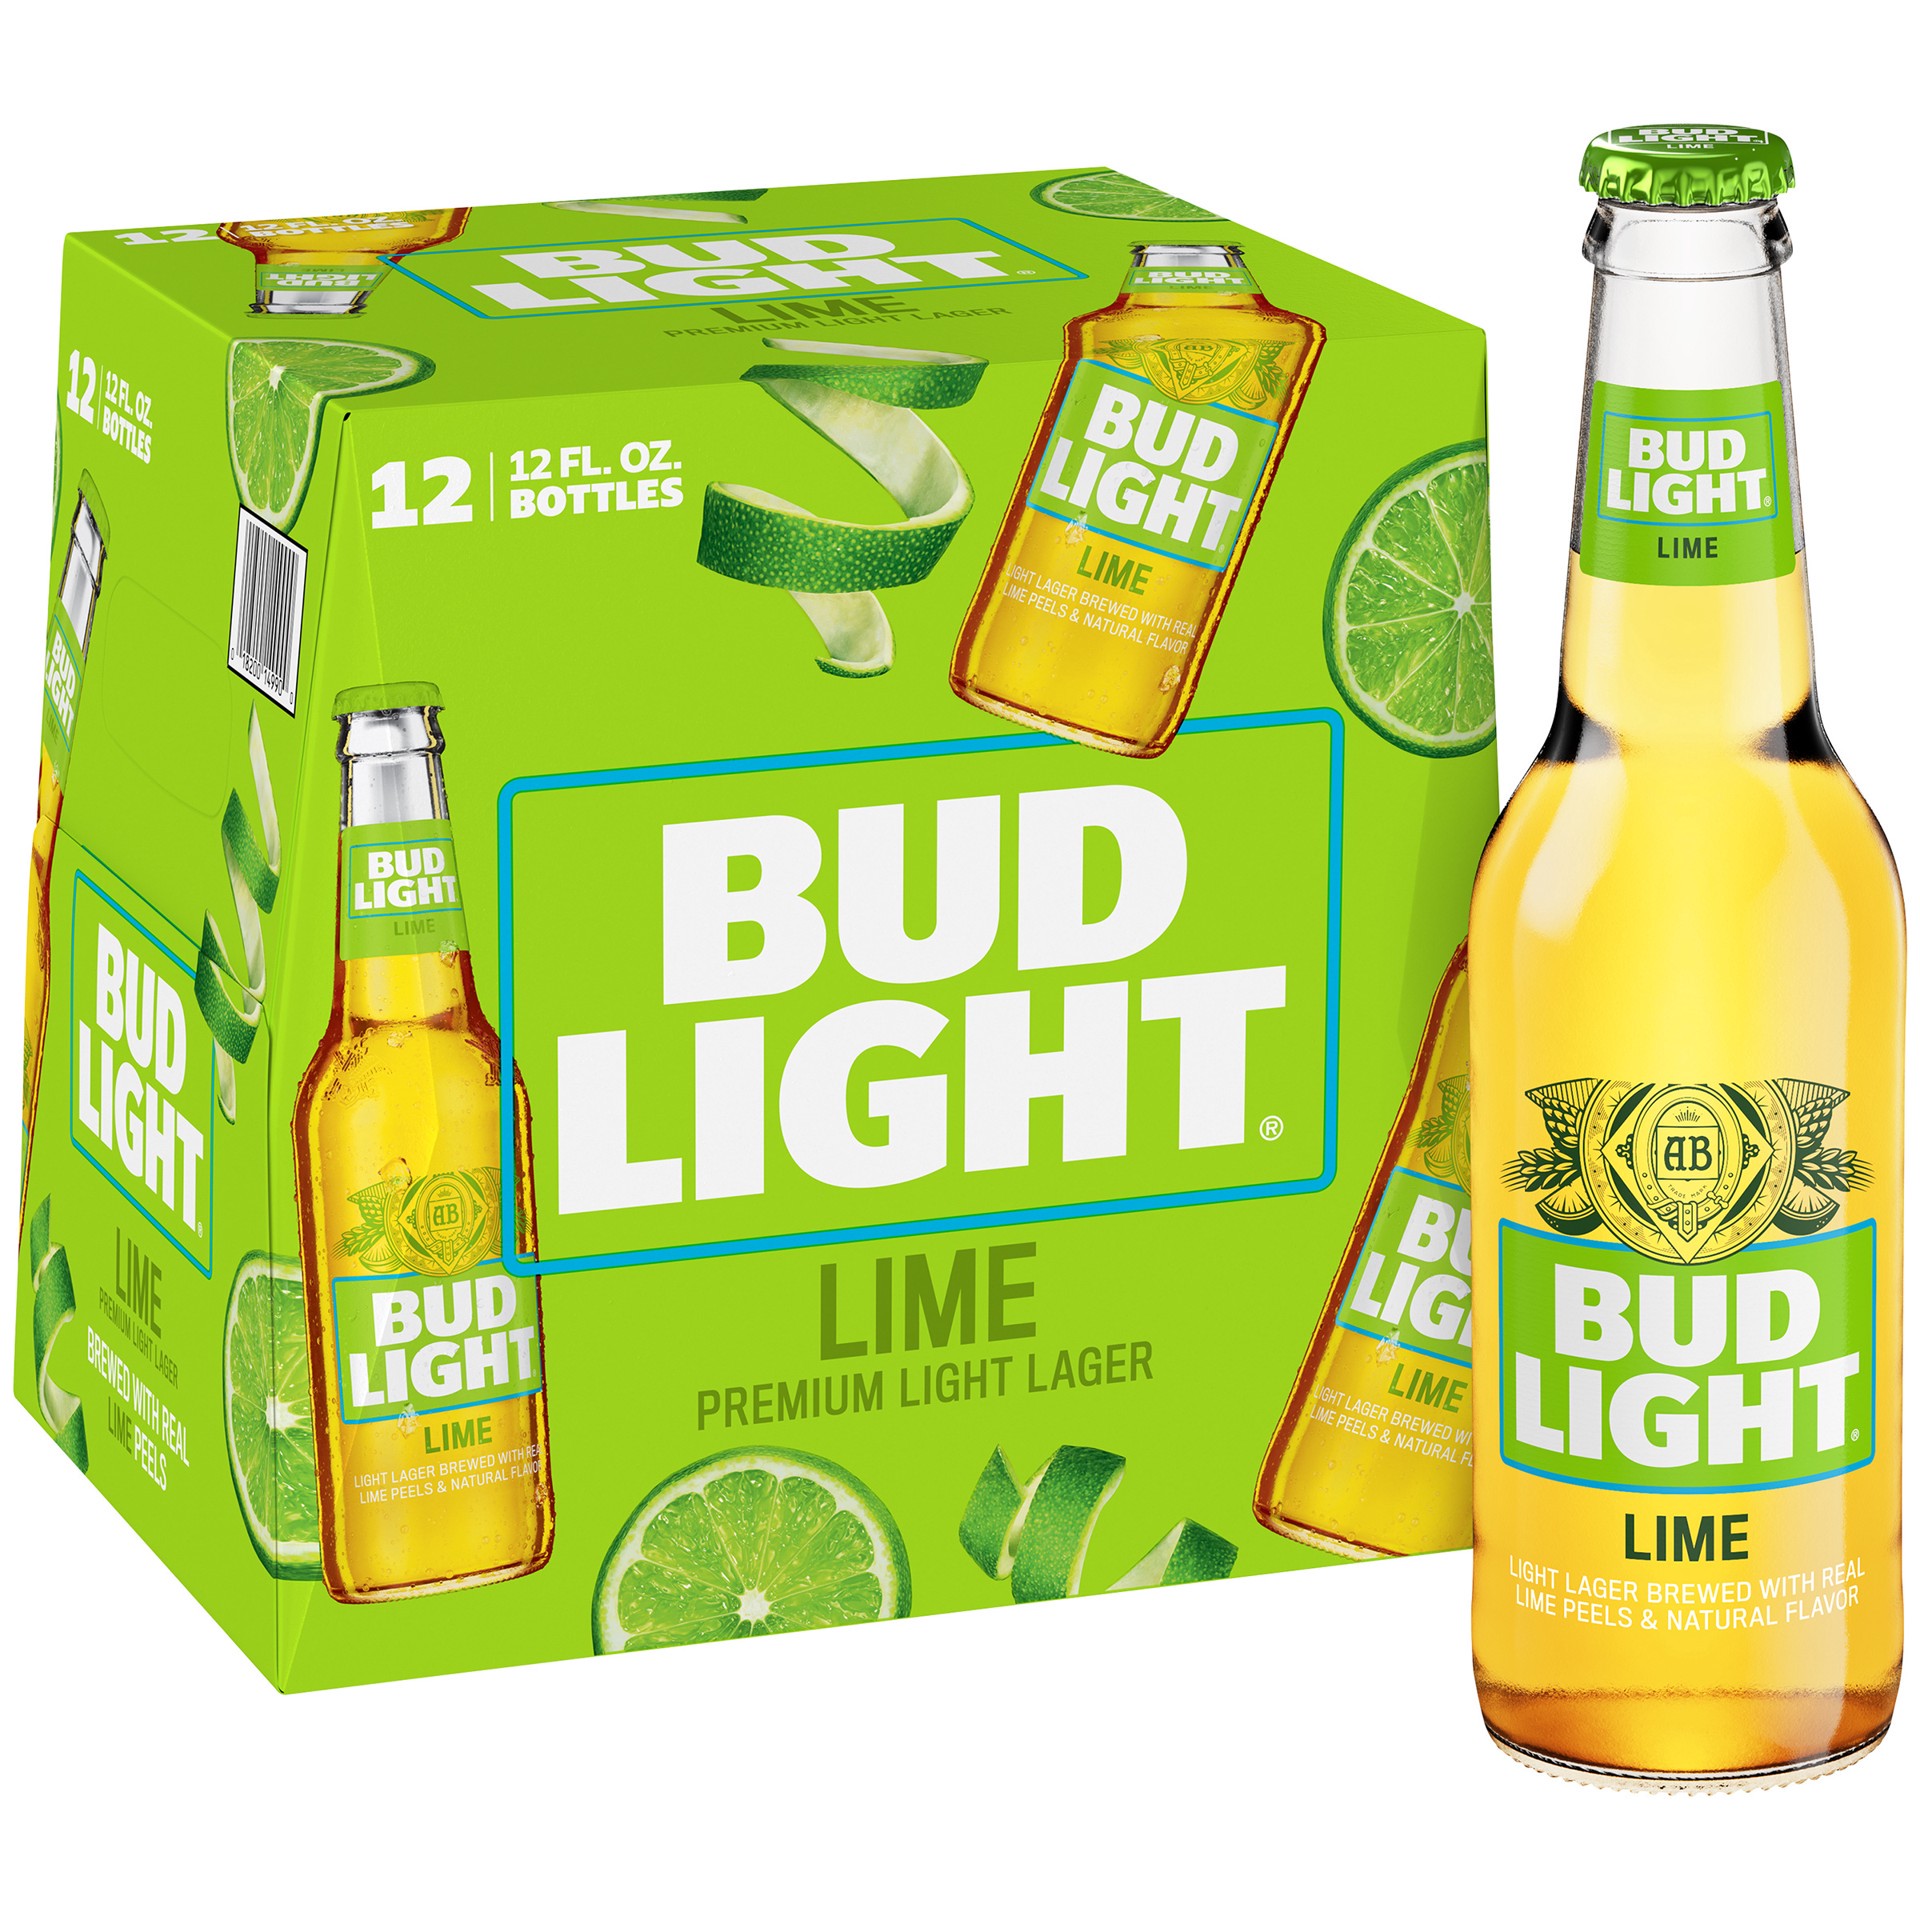 slide 1 of 16, Bud Light Lime is the classic Bud Light beer, but made with real lime peels. It is brewed using premium aroma hop varieties, barley malts and rice. Featuring a crisp taste, this beer has a hint of real lime flavor in every sip. 12 pack of bottles., 12 fl oz